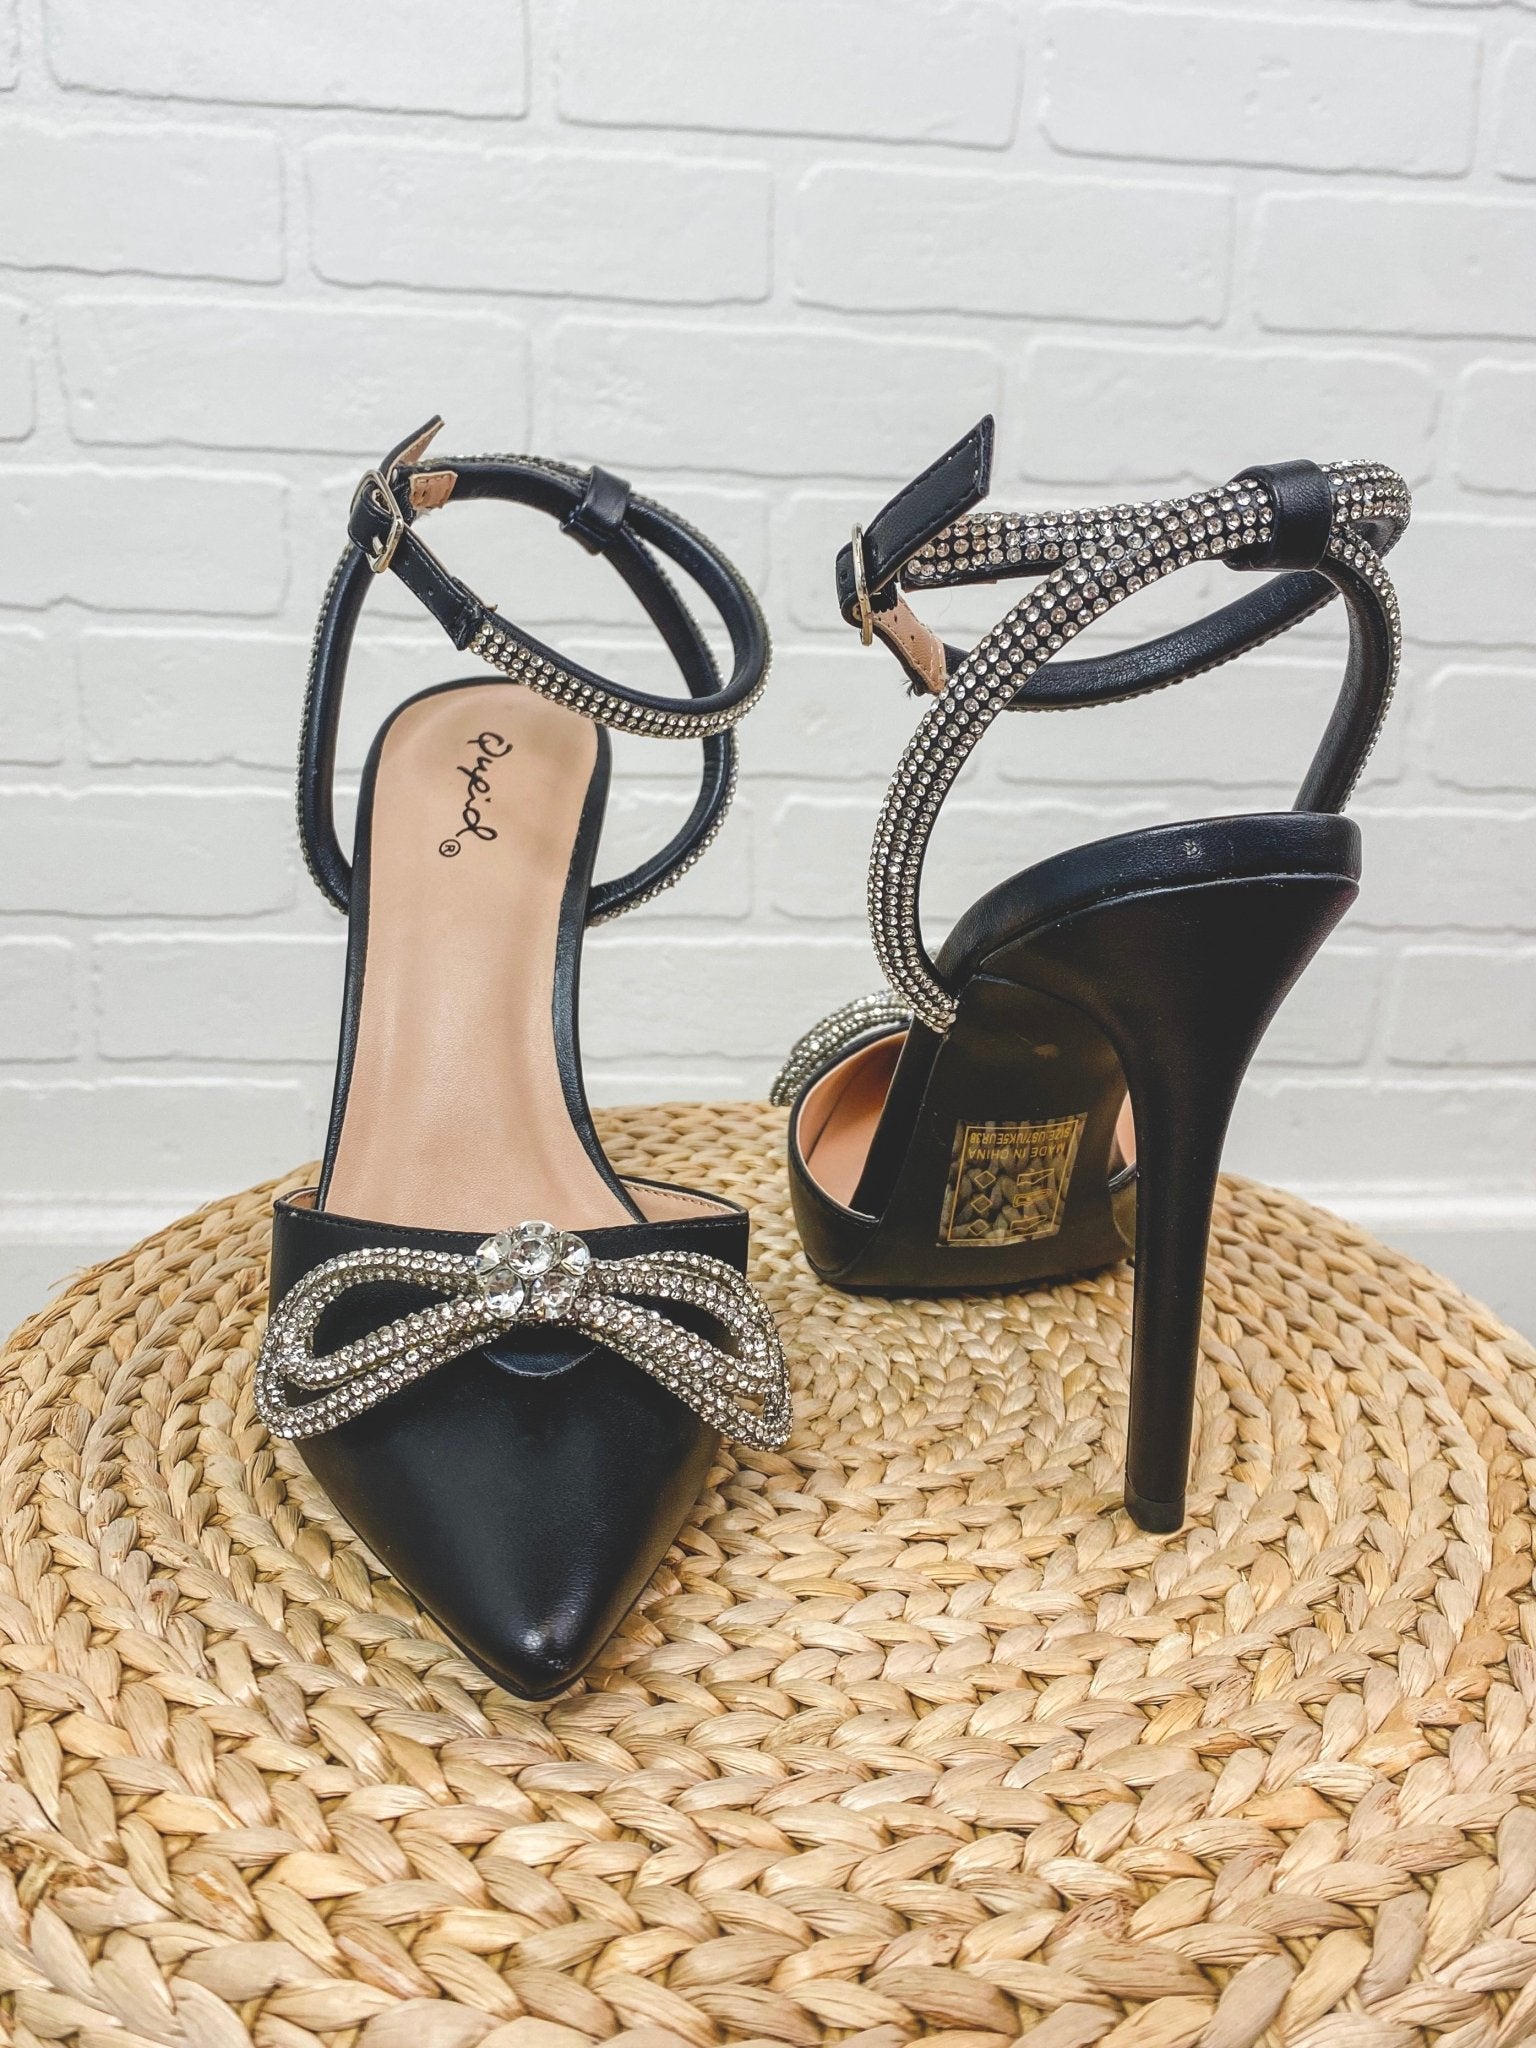 Show rhinestone ankle strap heel black - Affordable New Year's Eve Party Outfits at Lush Fashion Lounge Boutique in Oklahoma City